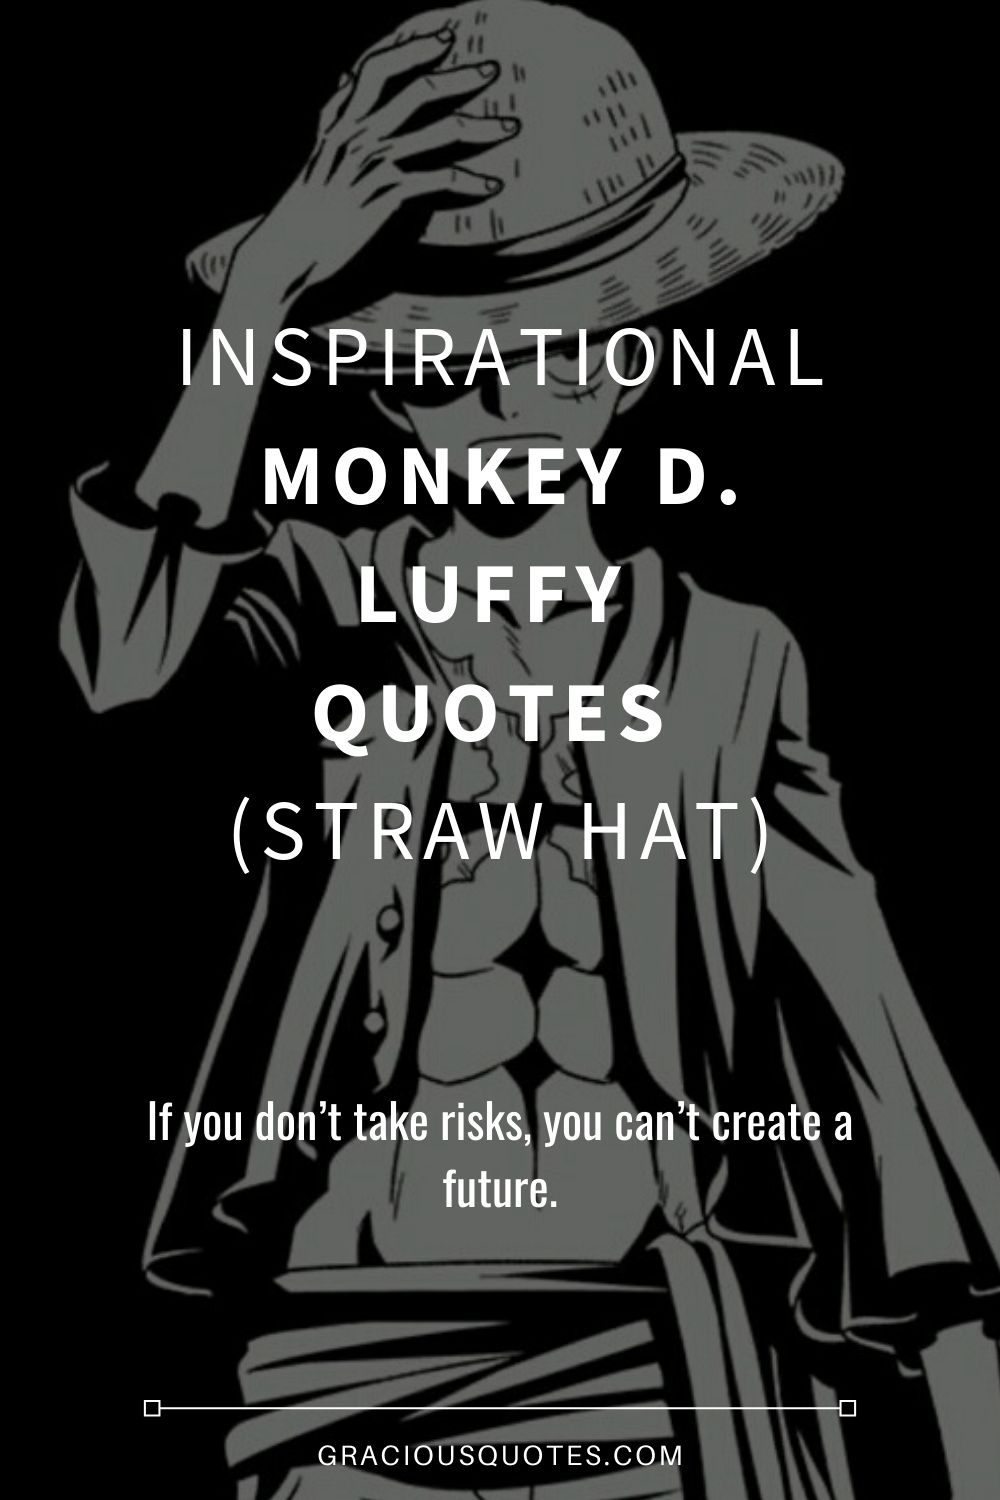 Inspirational Monkey D. Luffy Quotes (STRAW HAT) - Gracious Quotes